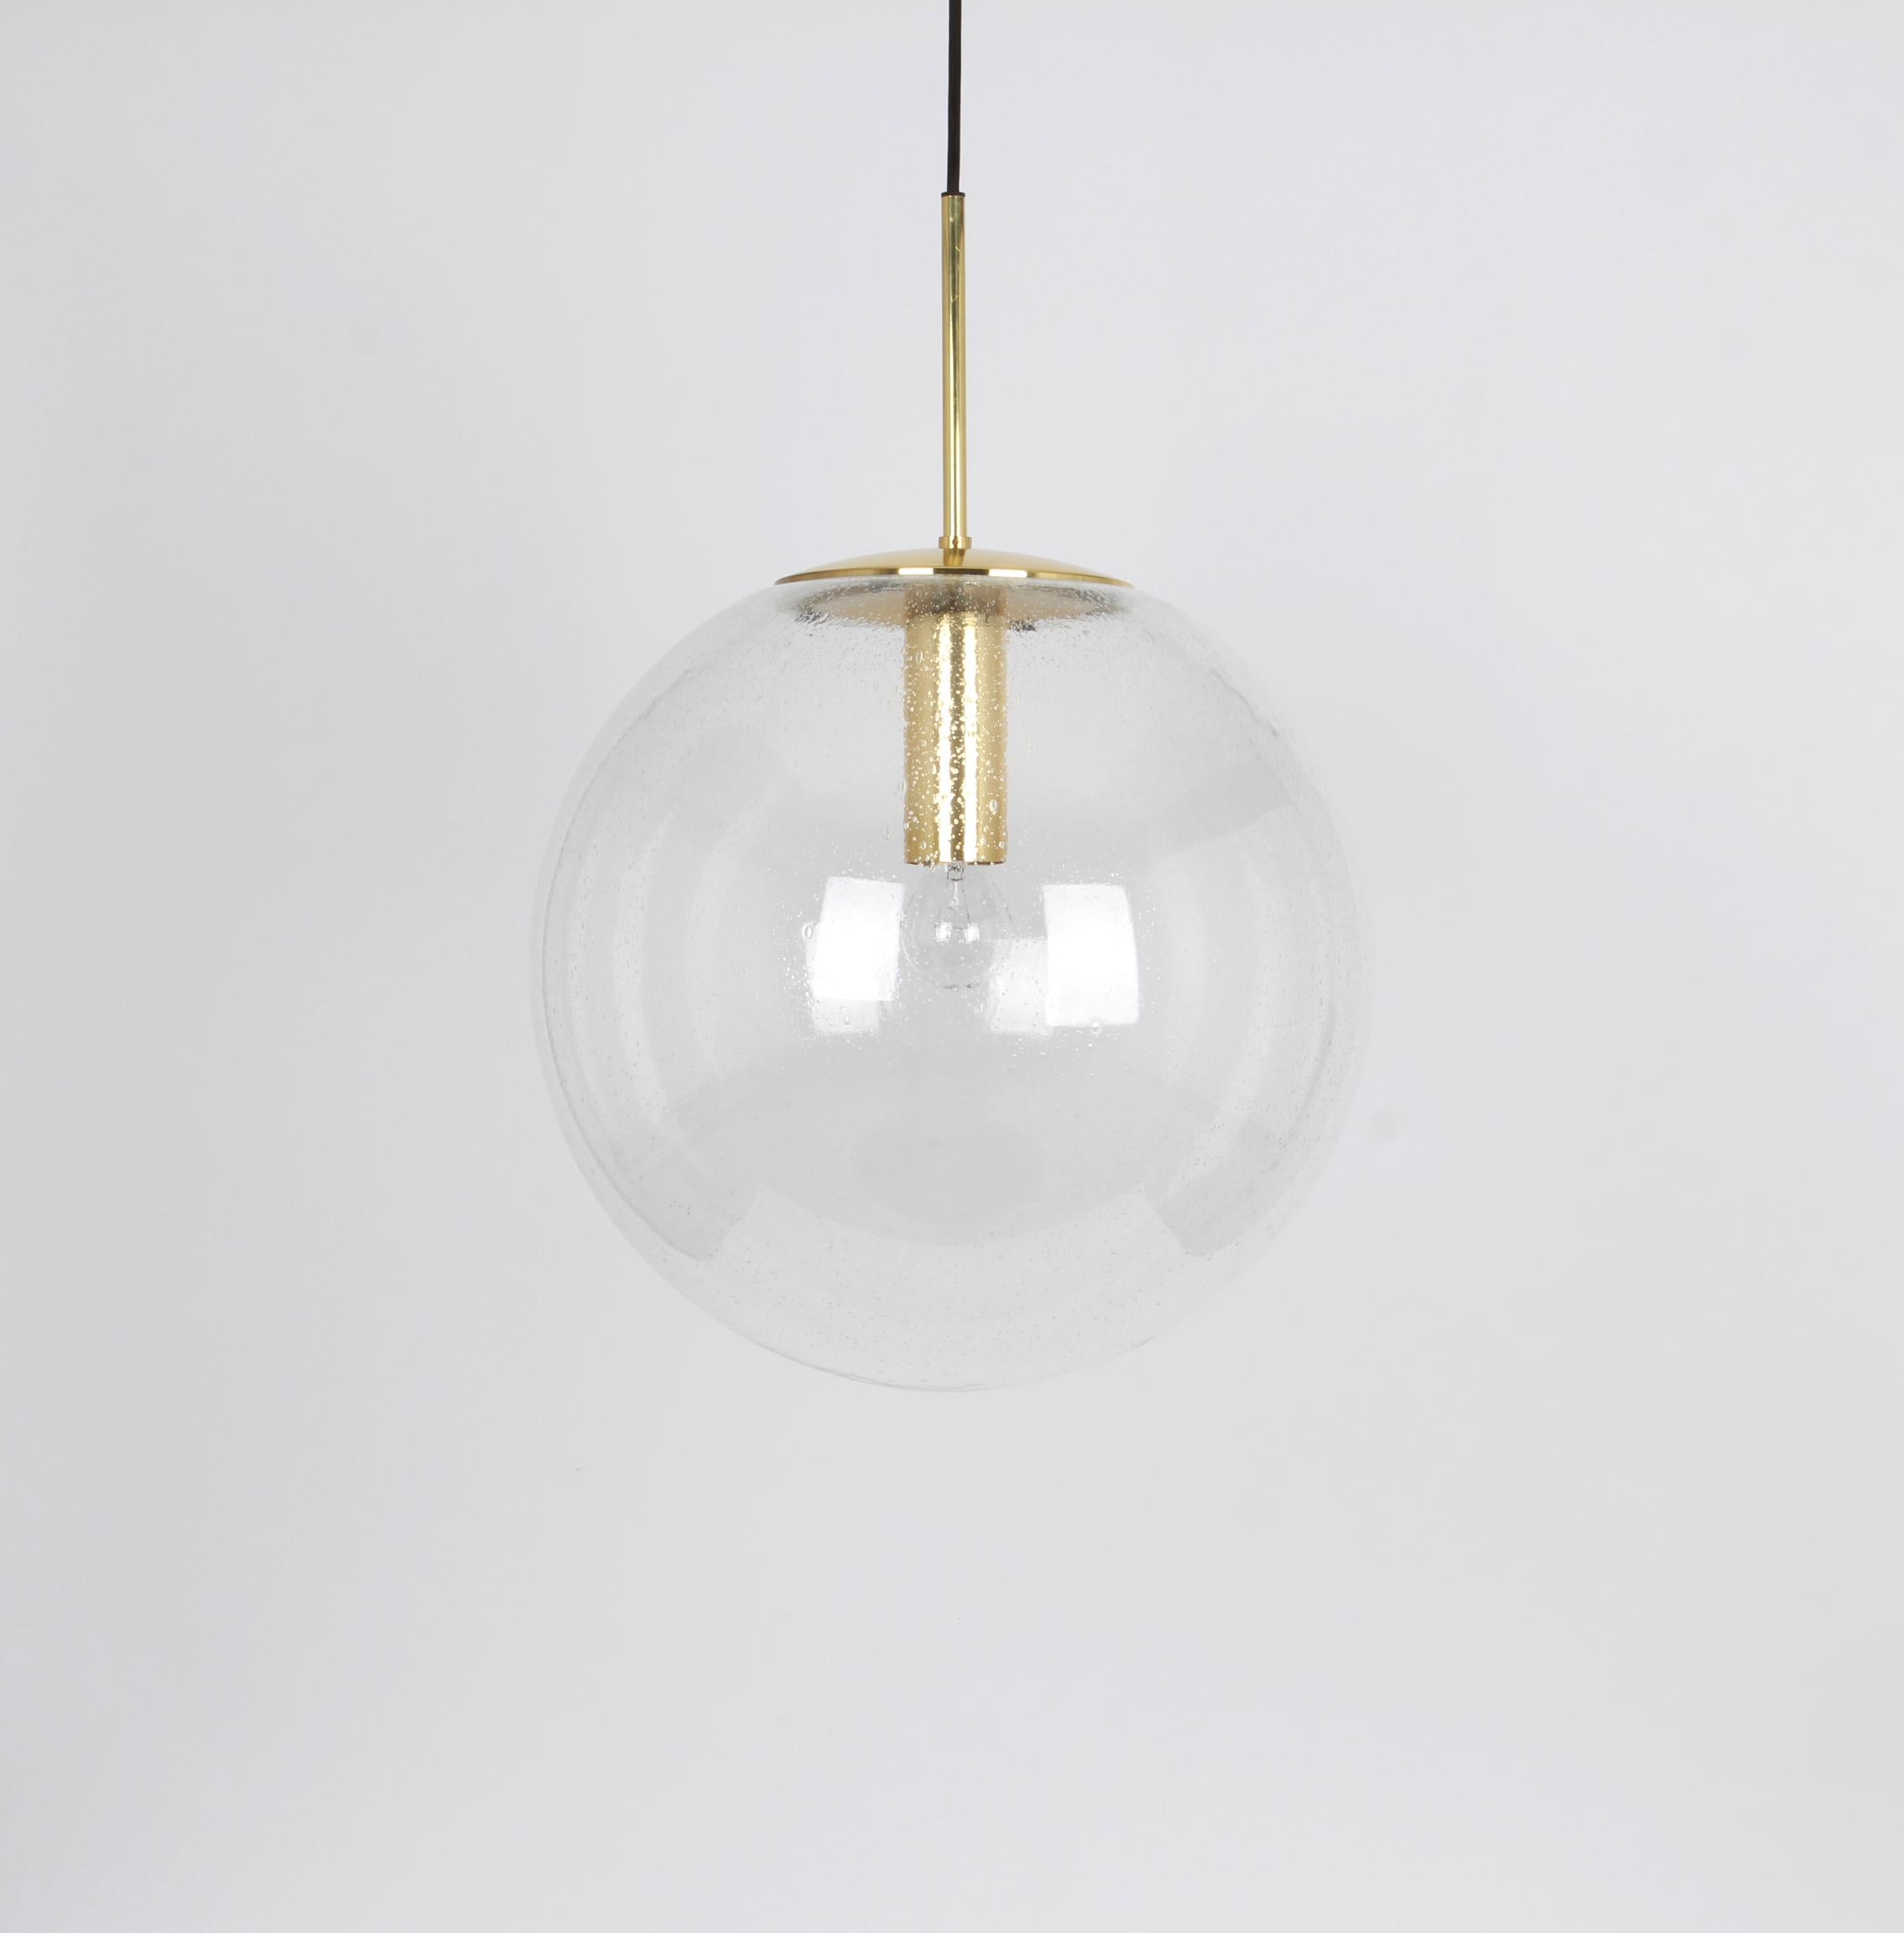 Large mouth-blown glass ball pendant, manufactured by Limburg, Germany, circa 1970-1979.

Sockets: 1 x E27 standard bulb and function on a voltage from 110 to 240 volts. (for USA - UK - etc..).
Drop rod can be adjusted as required, free of